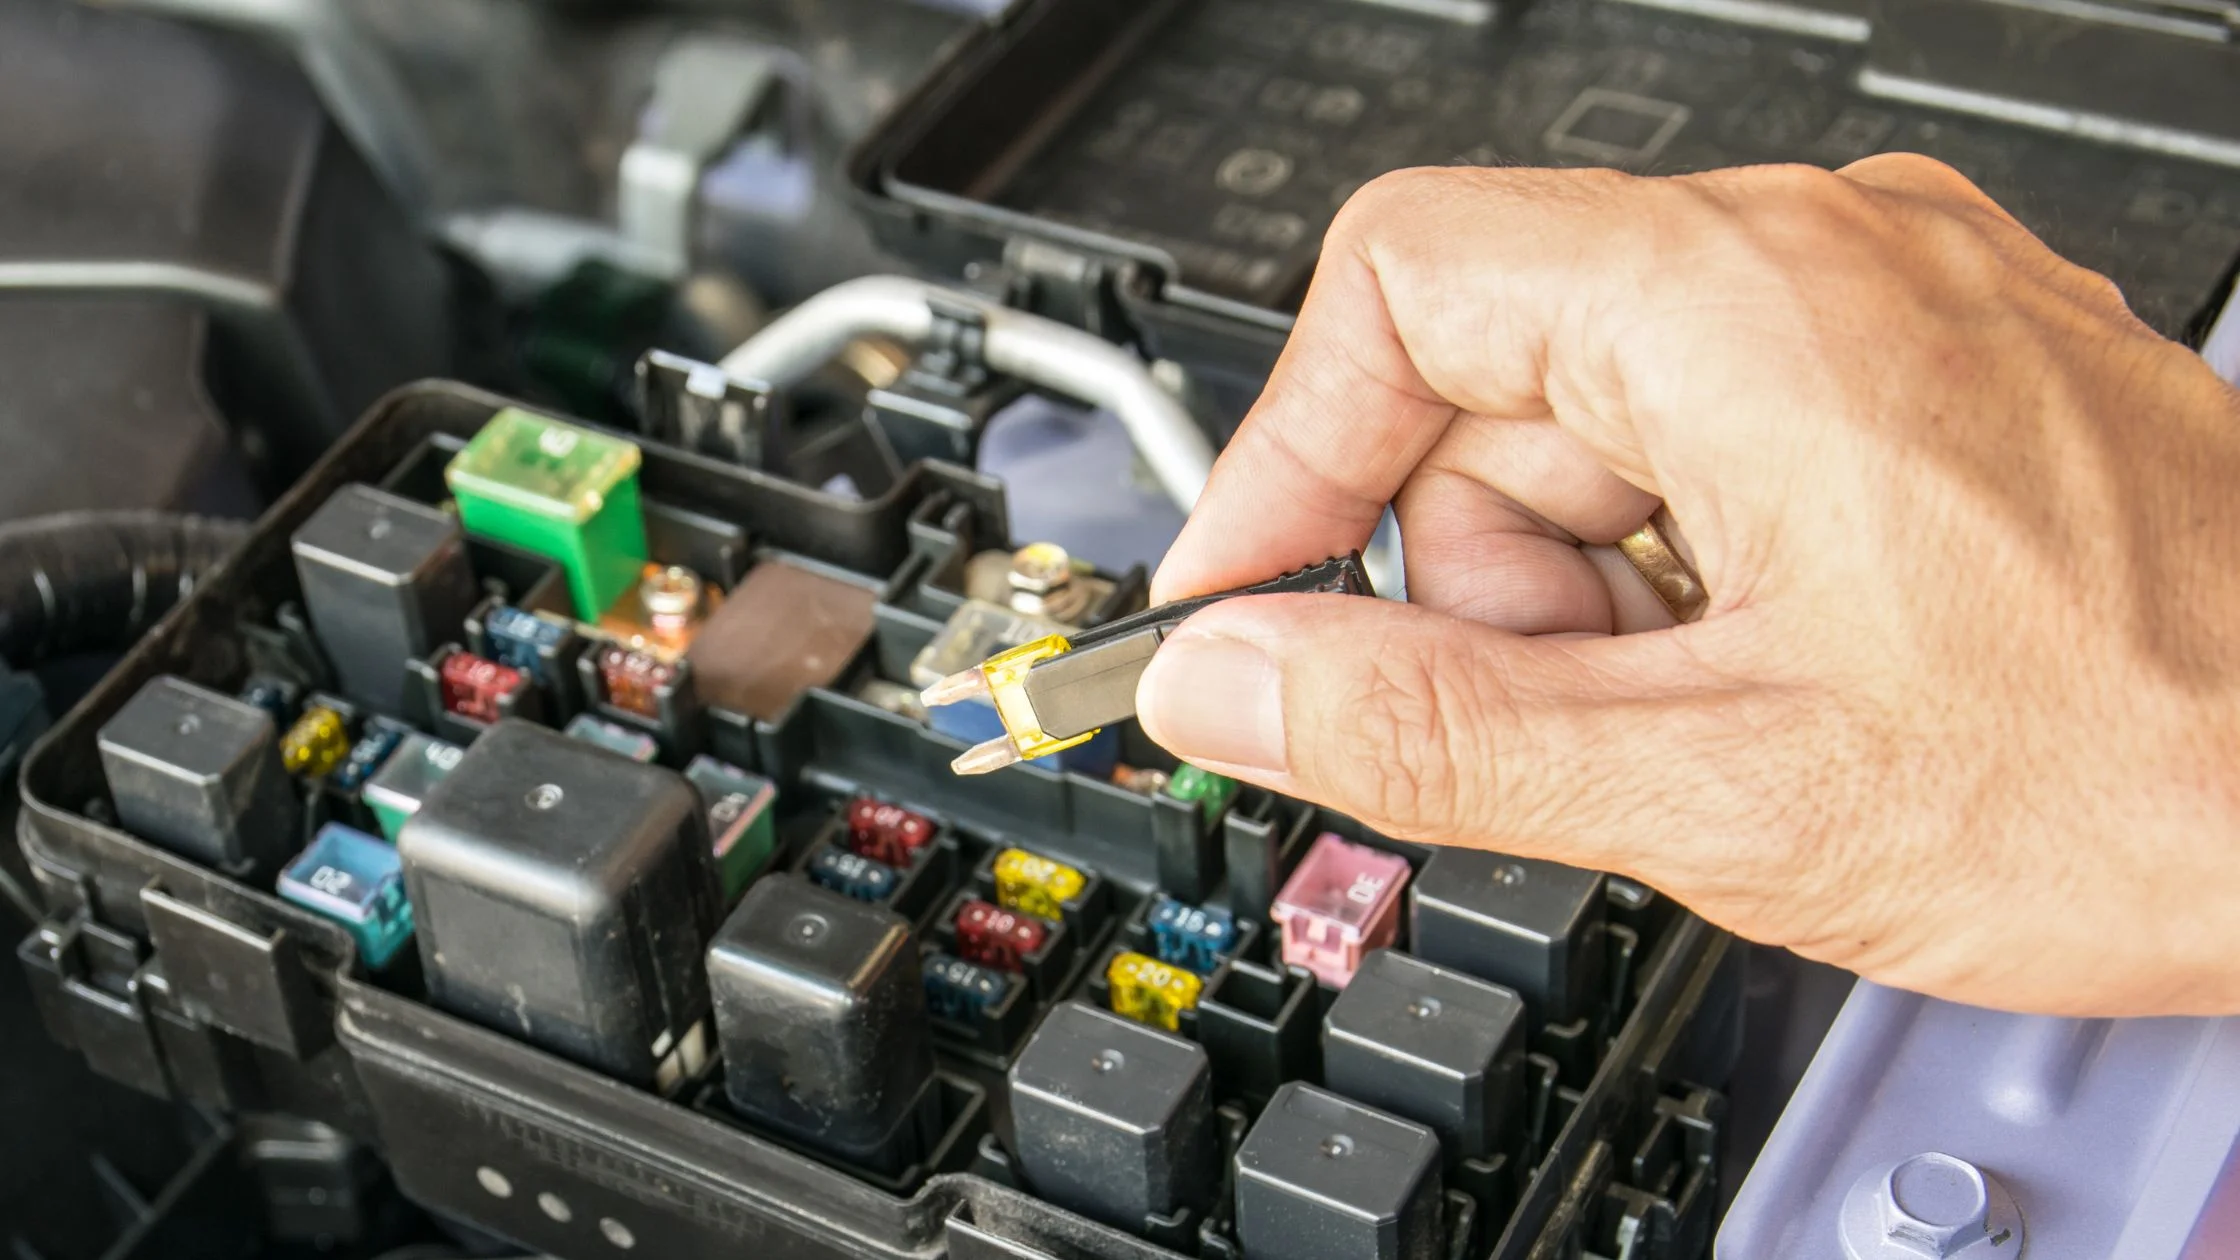 How To Check a Car Fuse Without a Multimeter